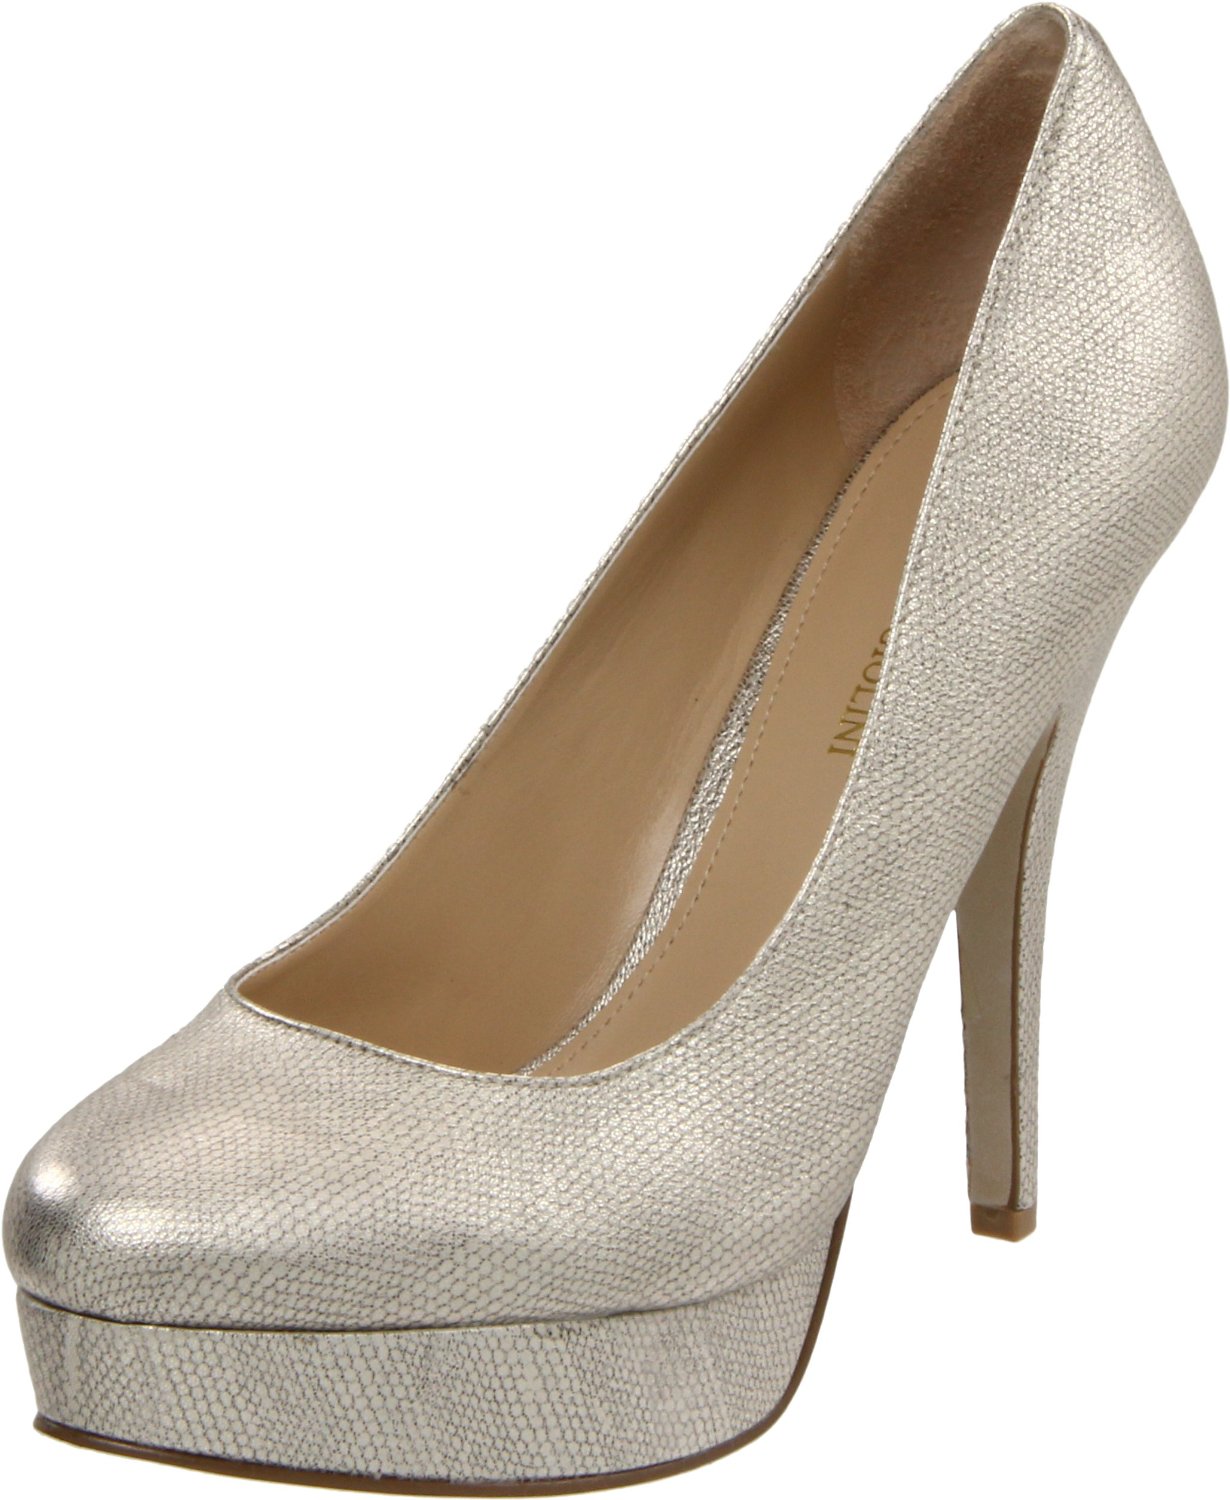 Enzo Angiolini Enzo Angiolini Womens Smiles Pump in Silver (light gold ...